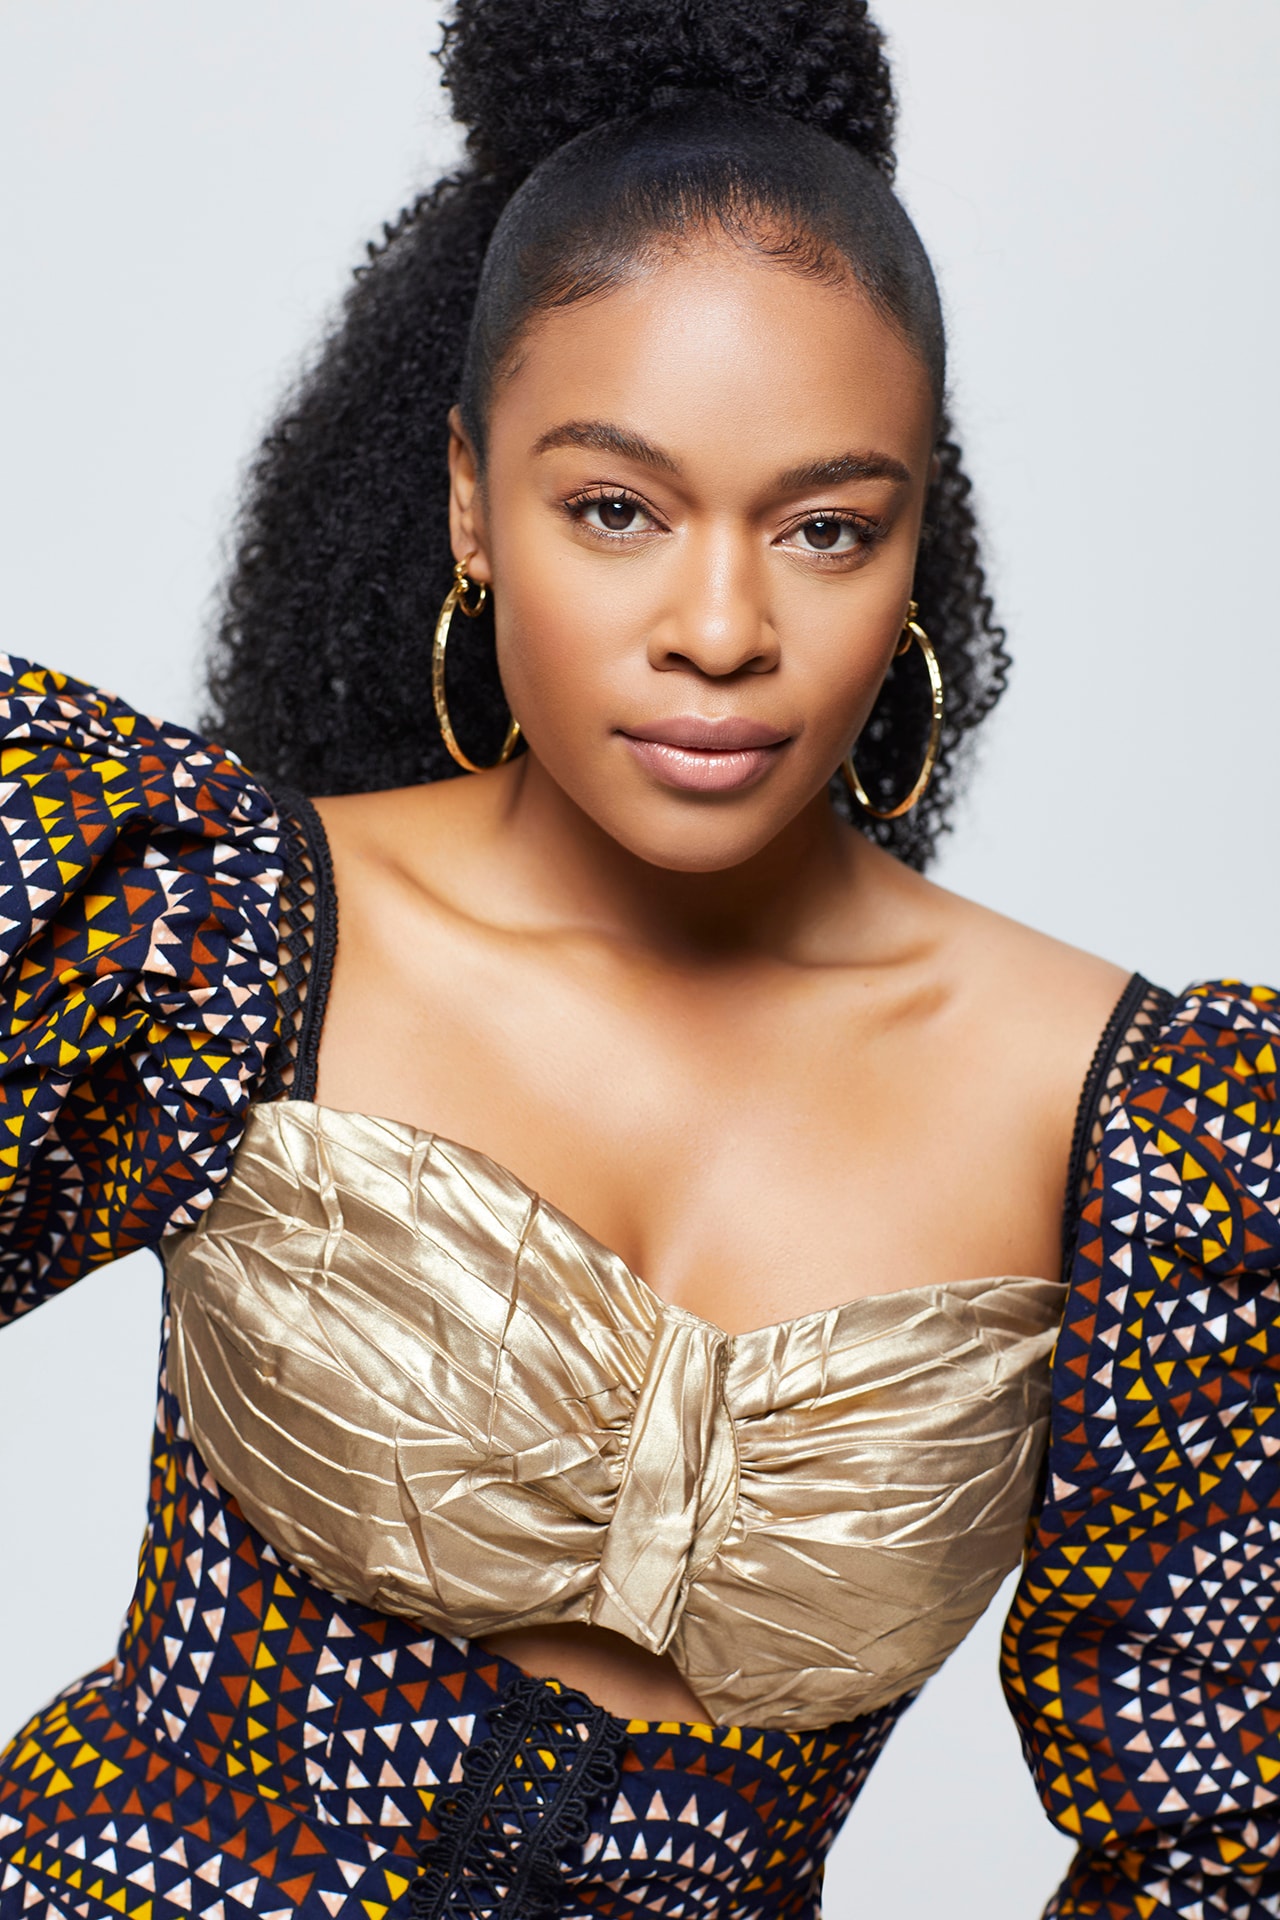 Nomzamo Mbatha Coming 2 America Movie Actor South African Actress Mirembe dress